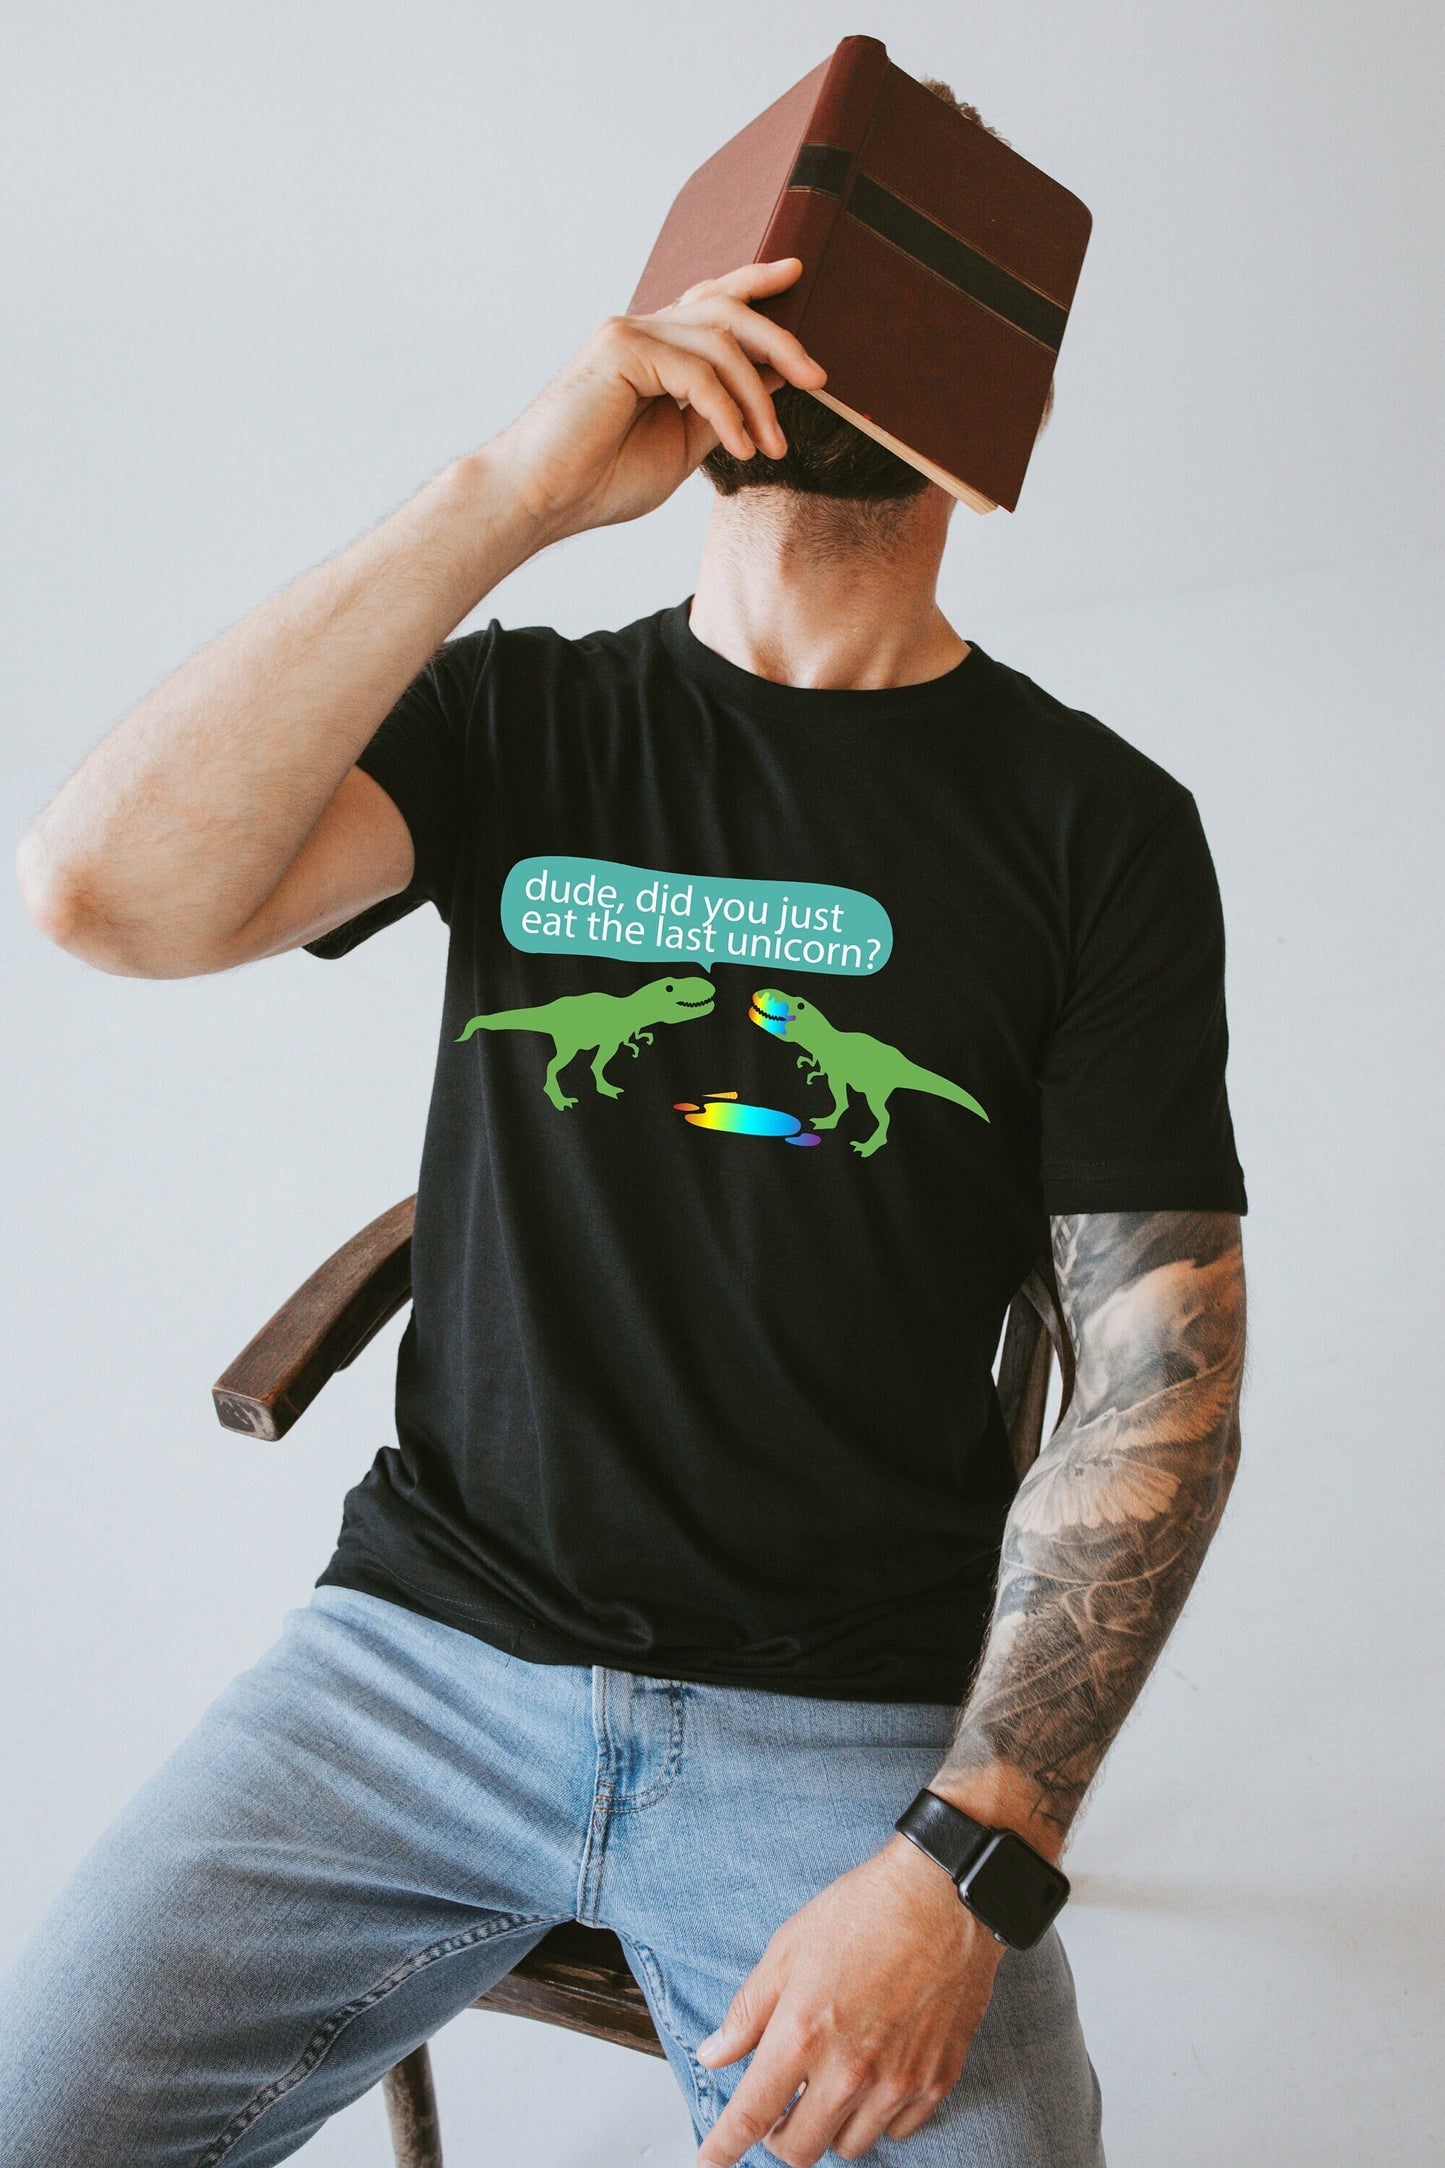 Dude Did You Just Eat The Last Unicorn Funny Dino Dinosaur Tees For Adults Ultra Soft Graphic Tee Unisex Soft Tee T-shirt for Women or Men